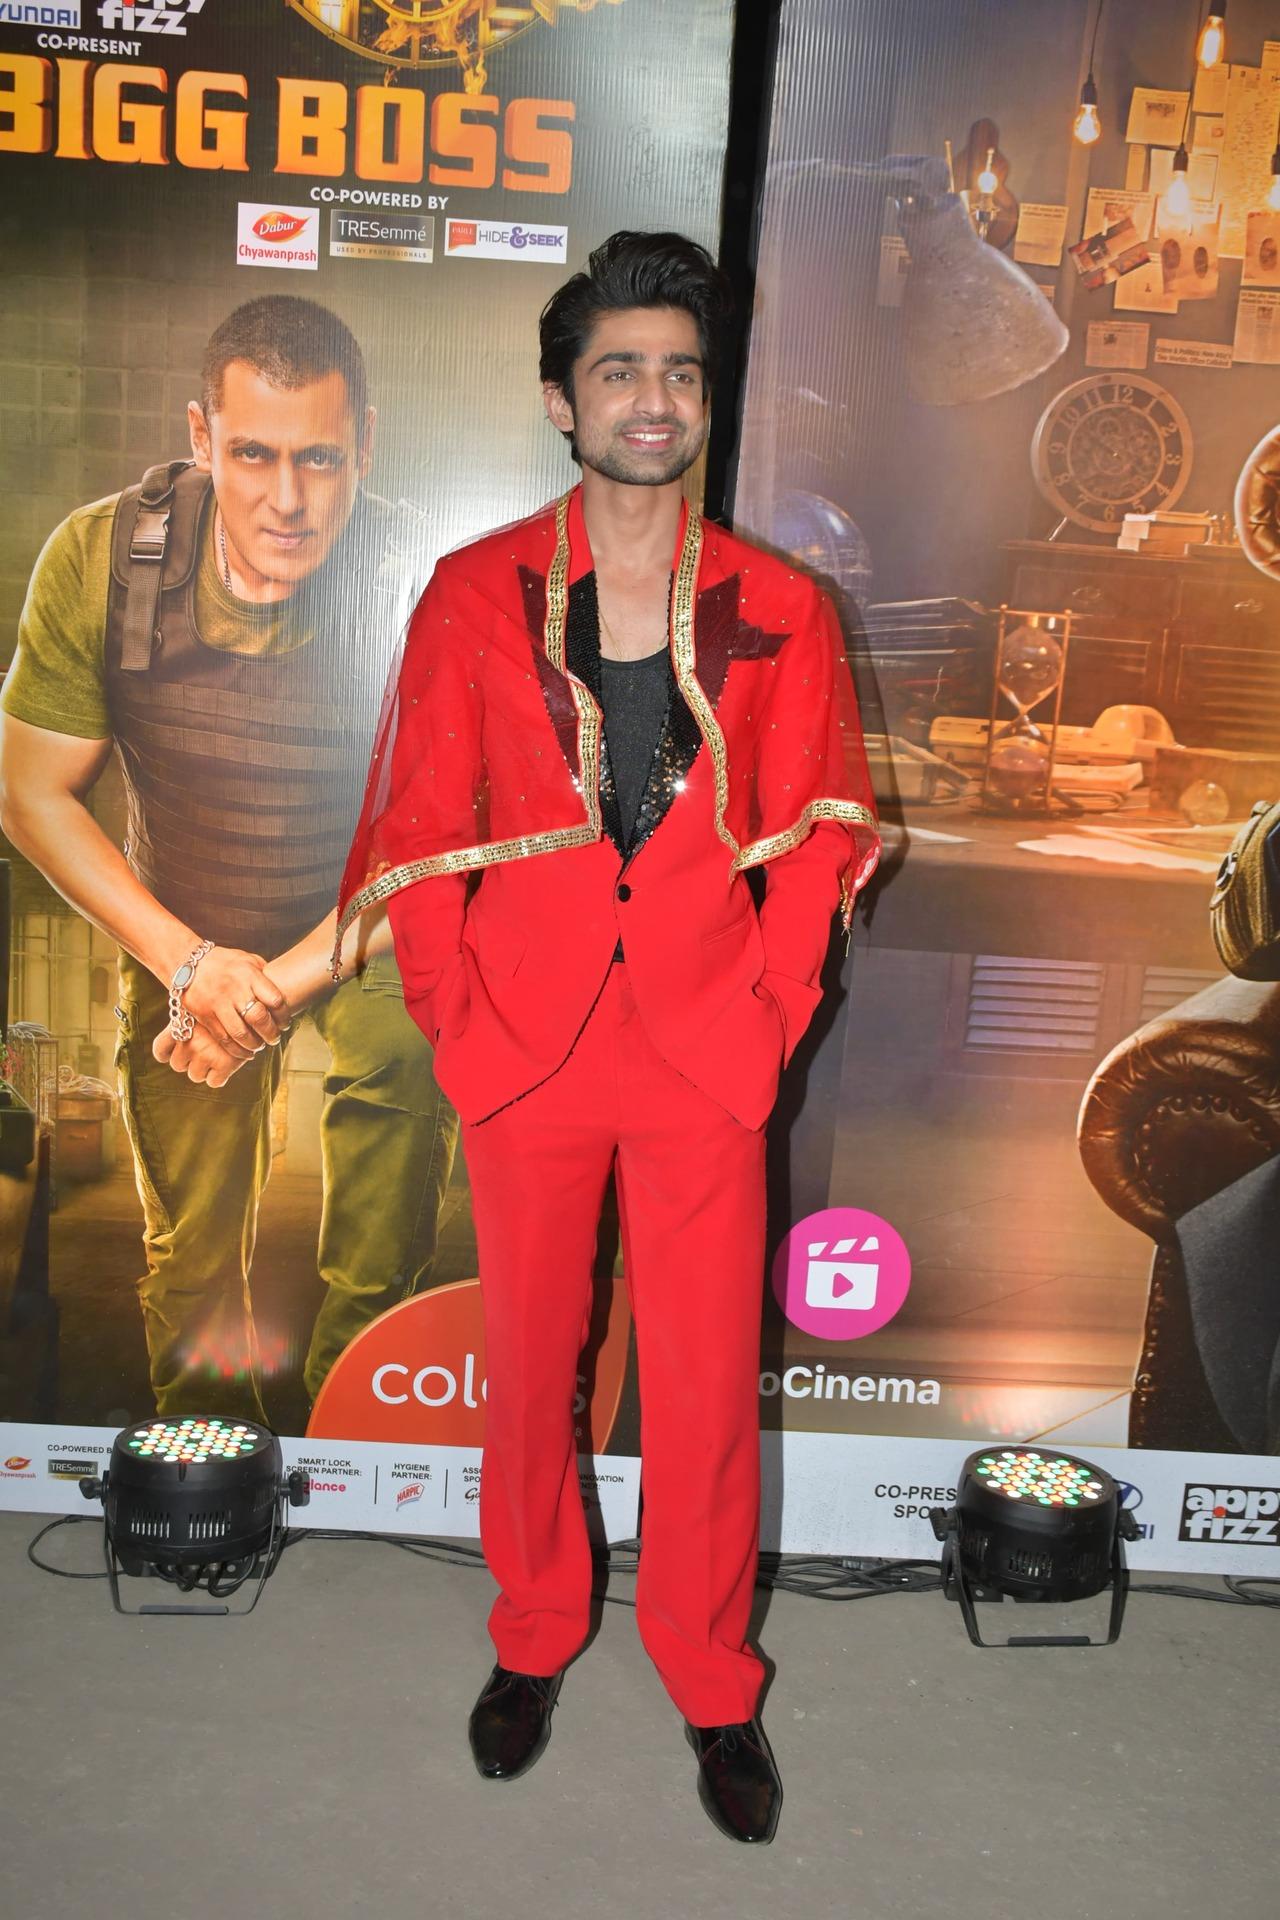 Abhishek Kumar was dressed in a red suit for the finale. He finished the game at second place